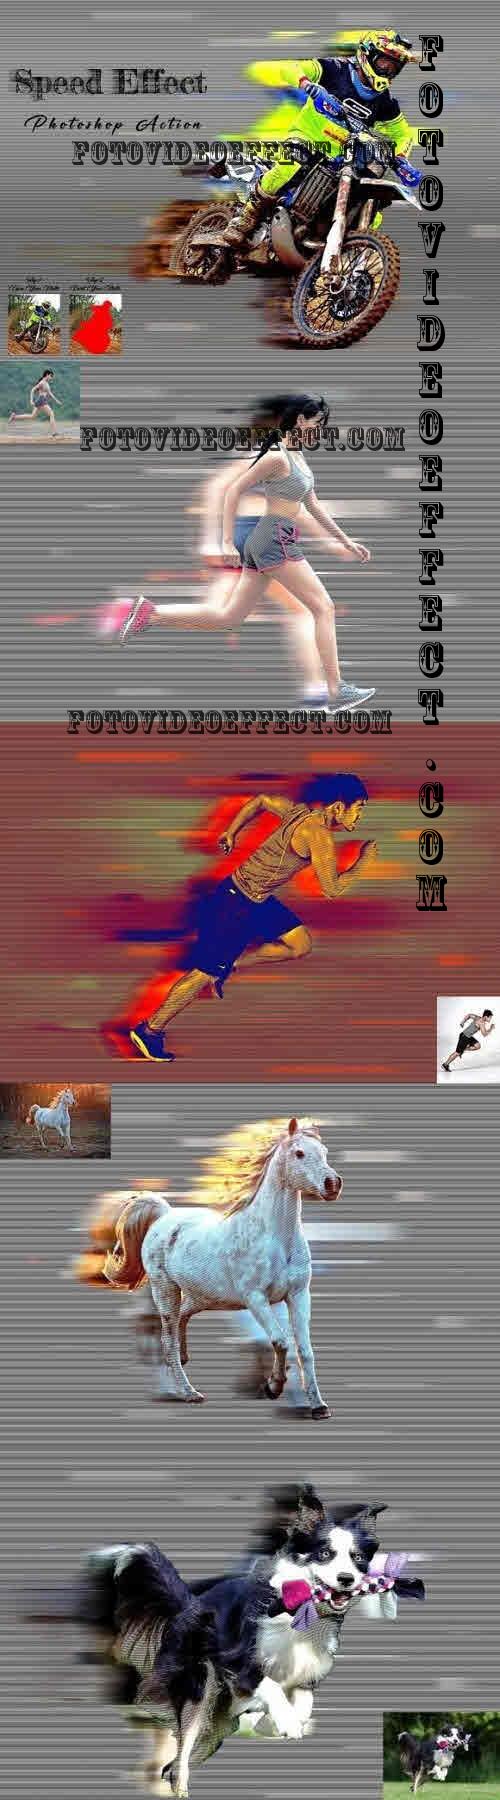 Speed Effect Photoshop Action - 10936055